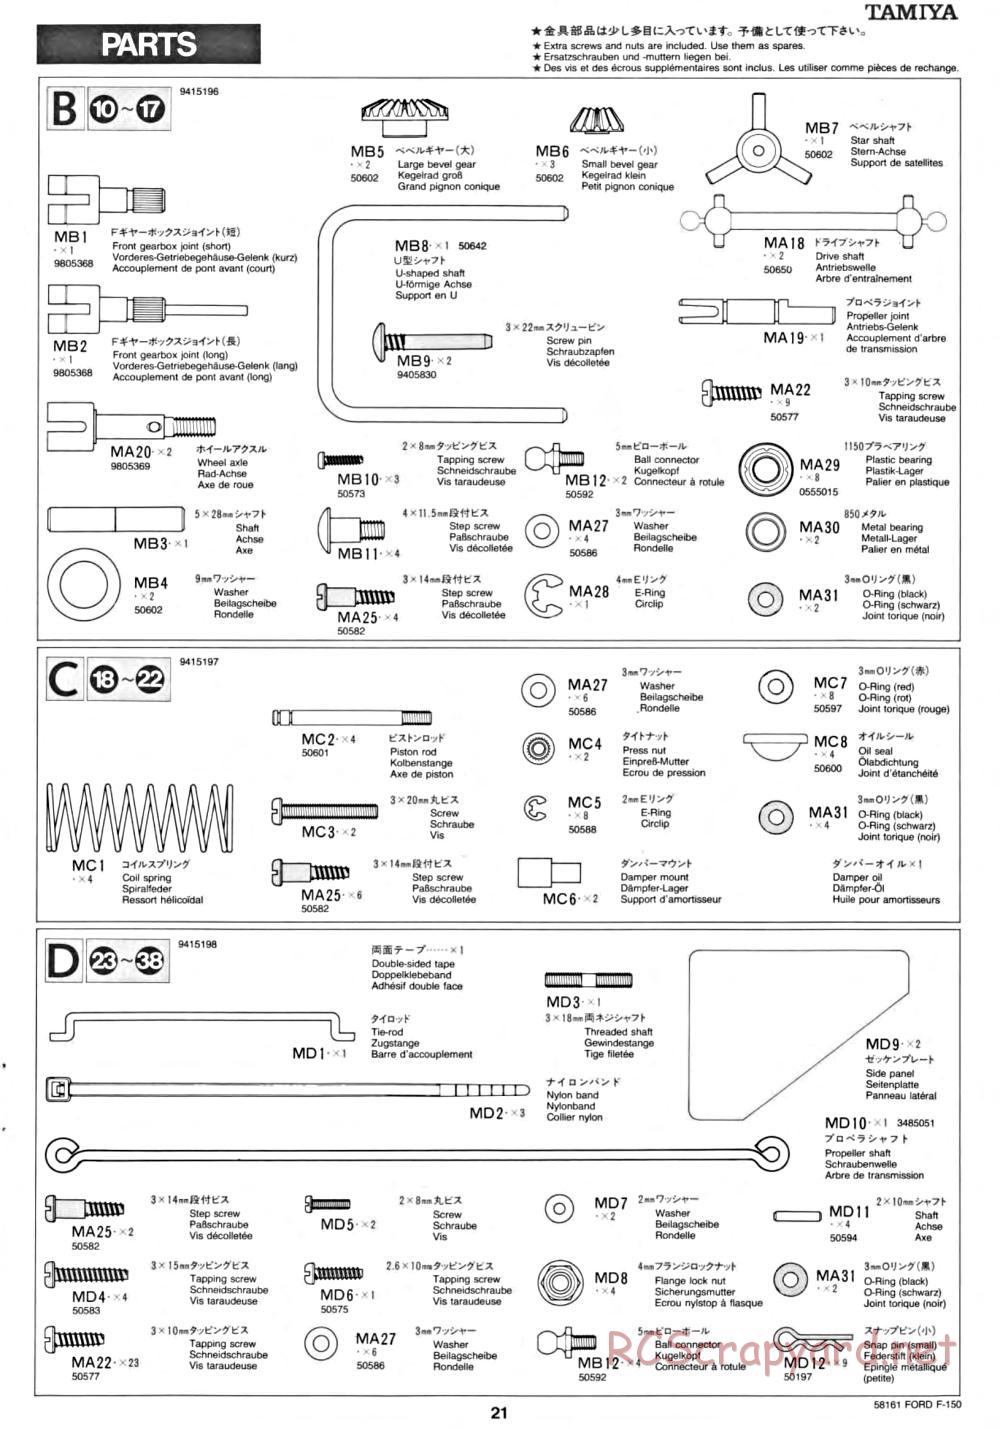 Tamiya - Ford F-150 Truck Chassis - Manual - Page 21